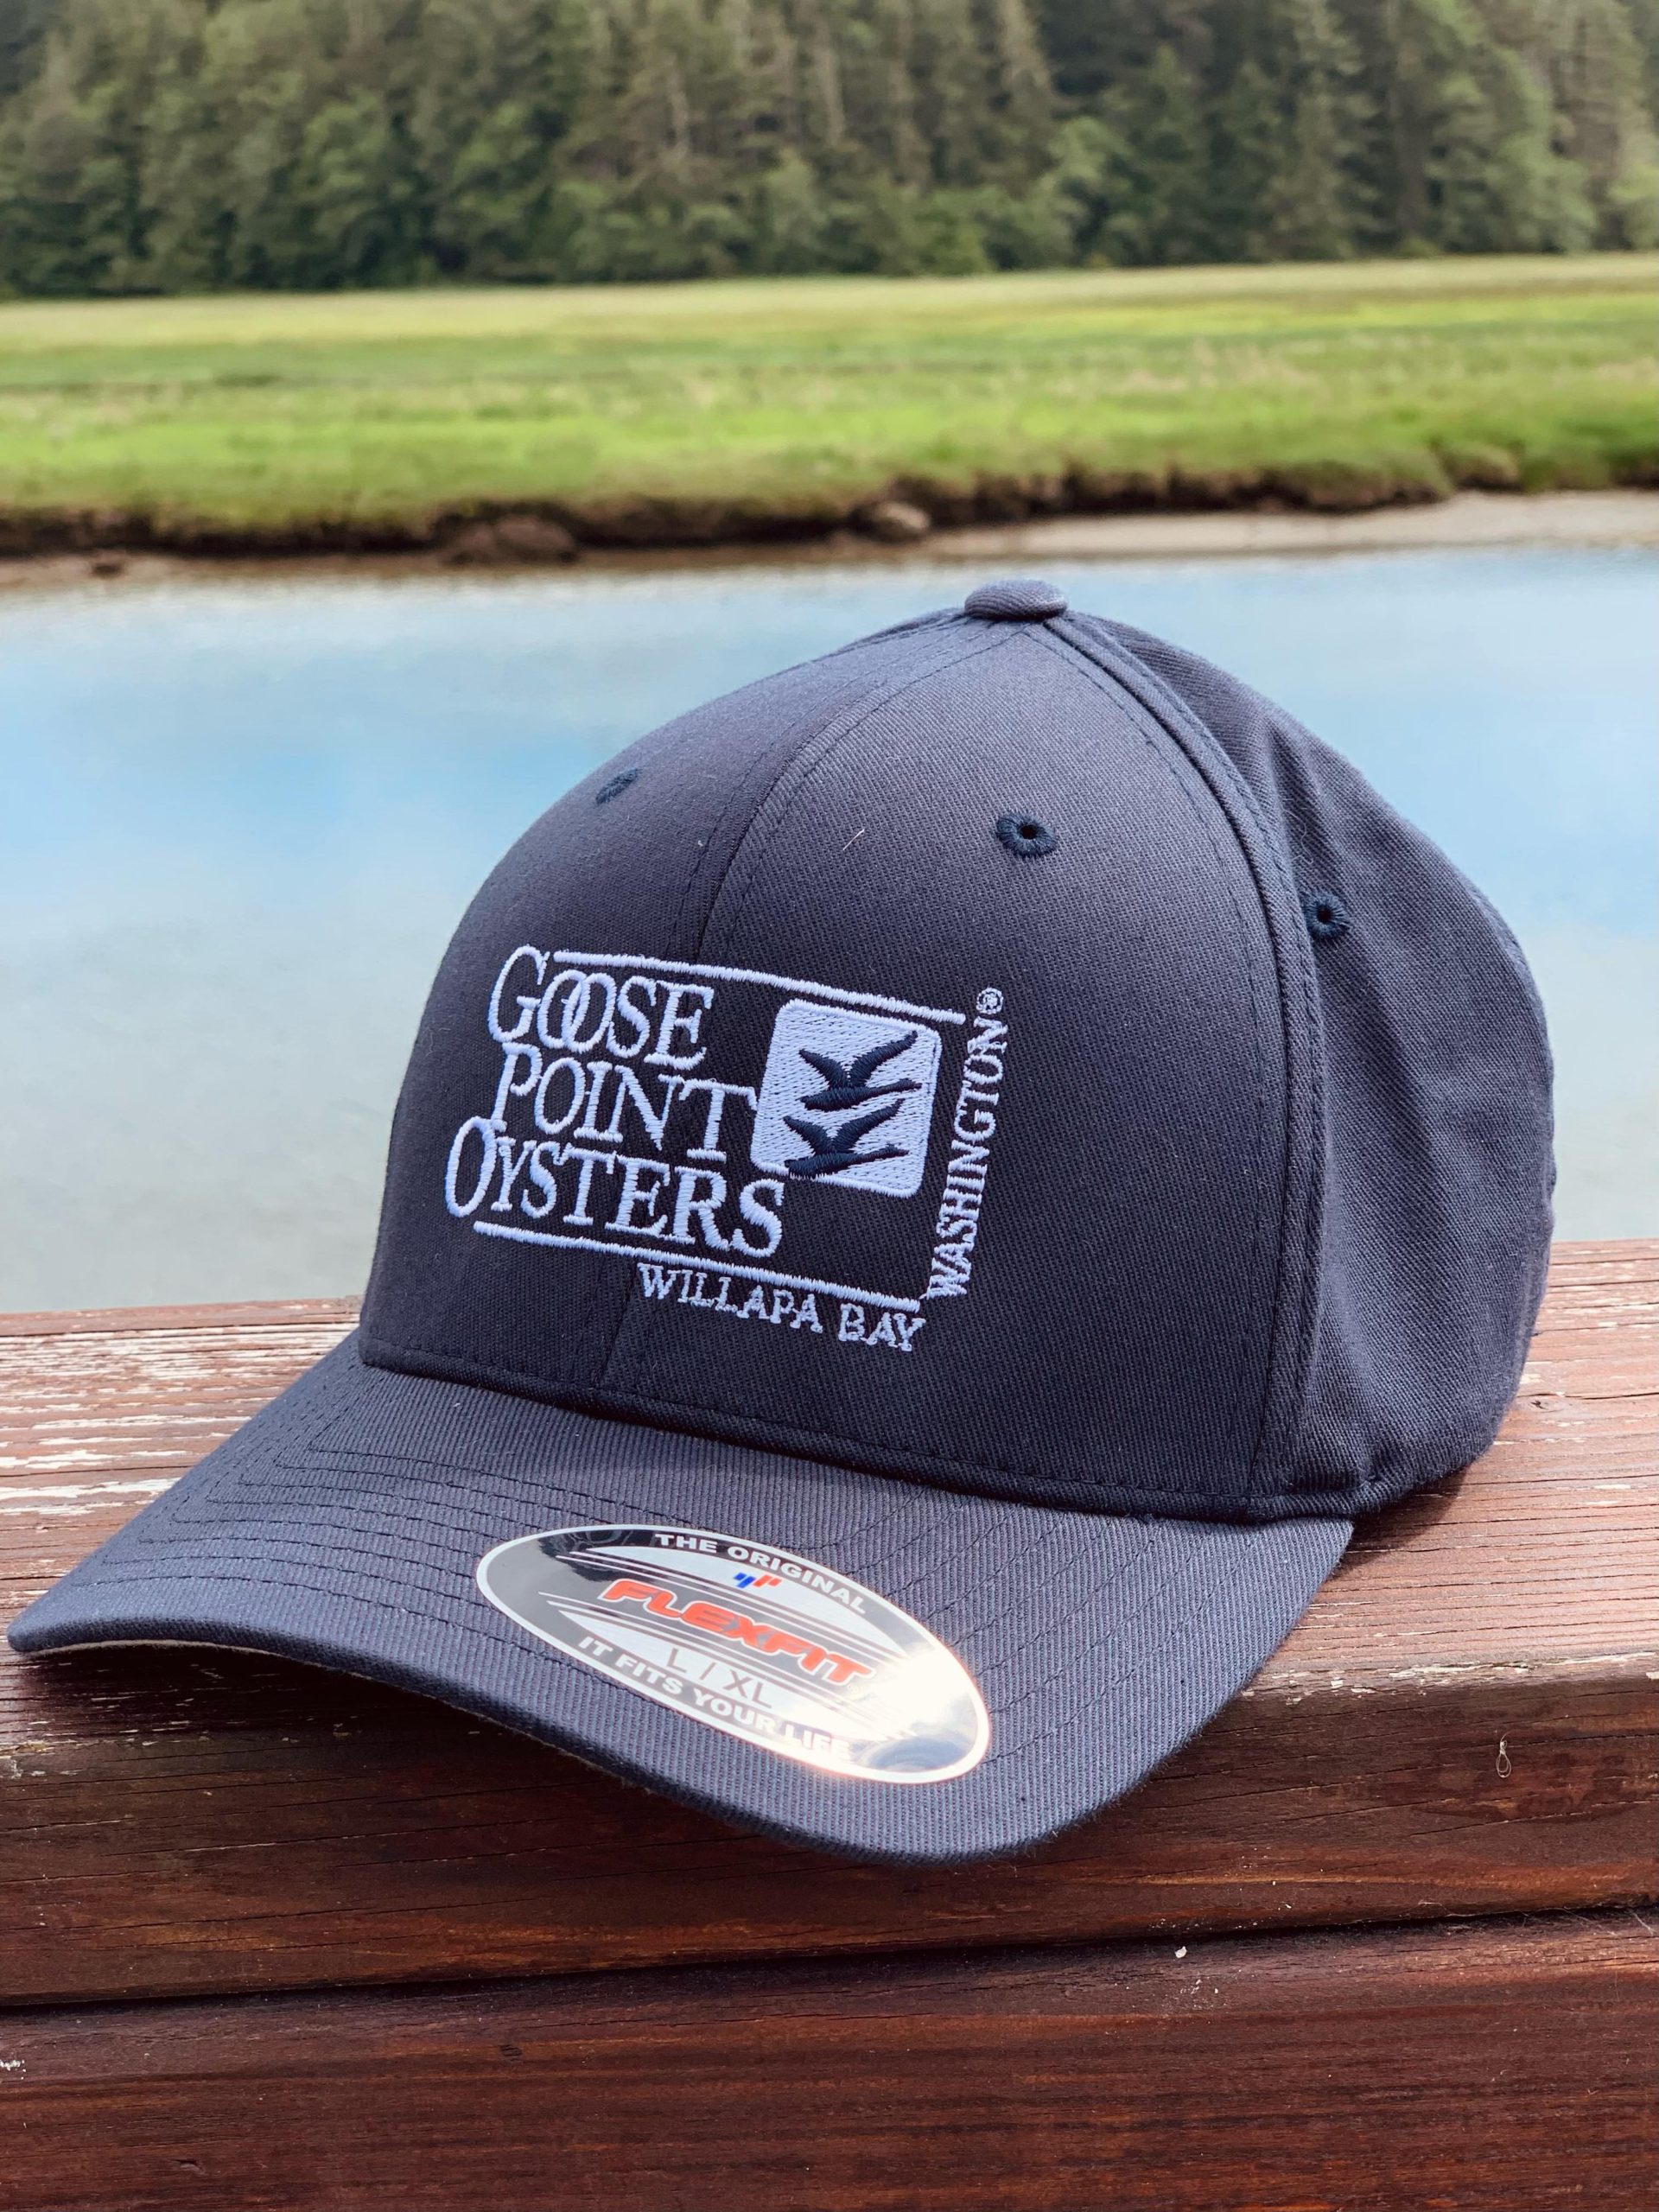 Goose Point Oysters Flex Fit Hat